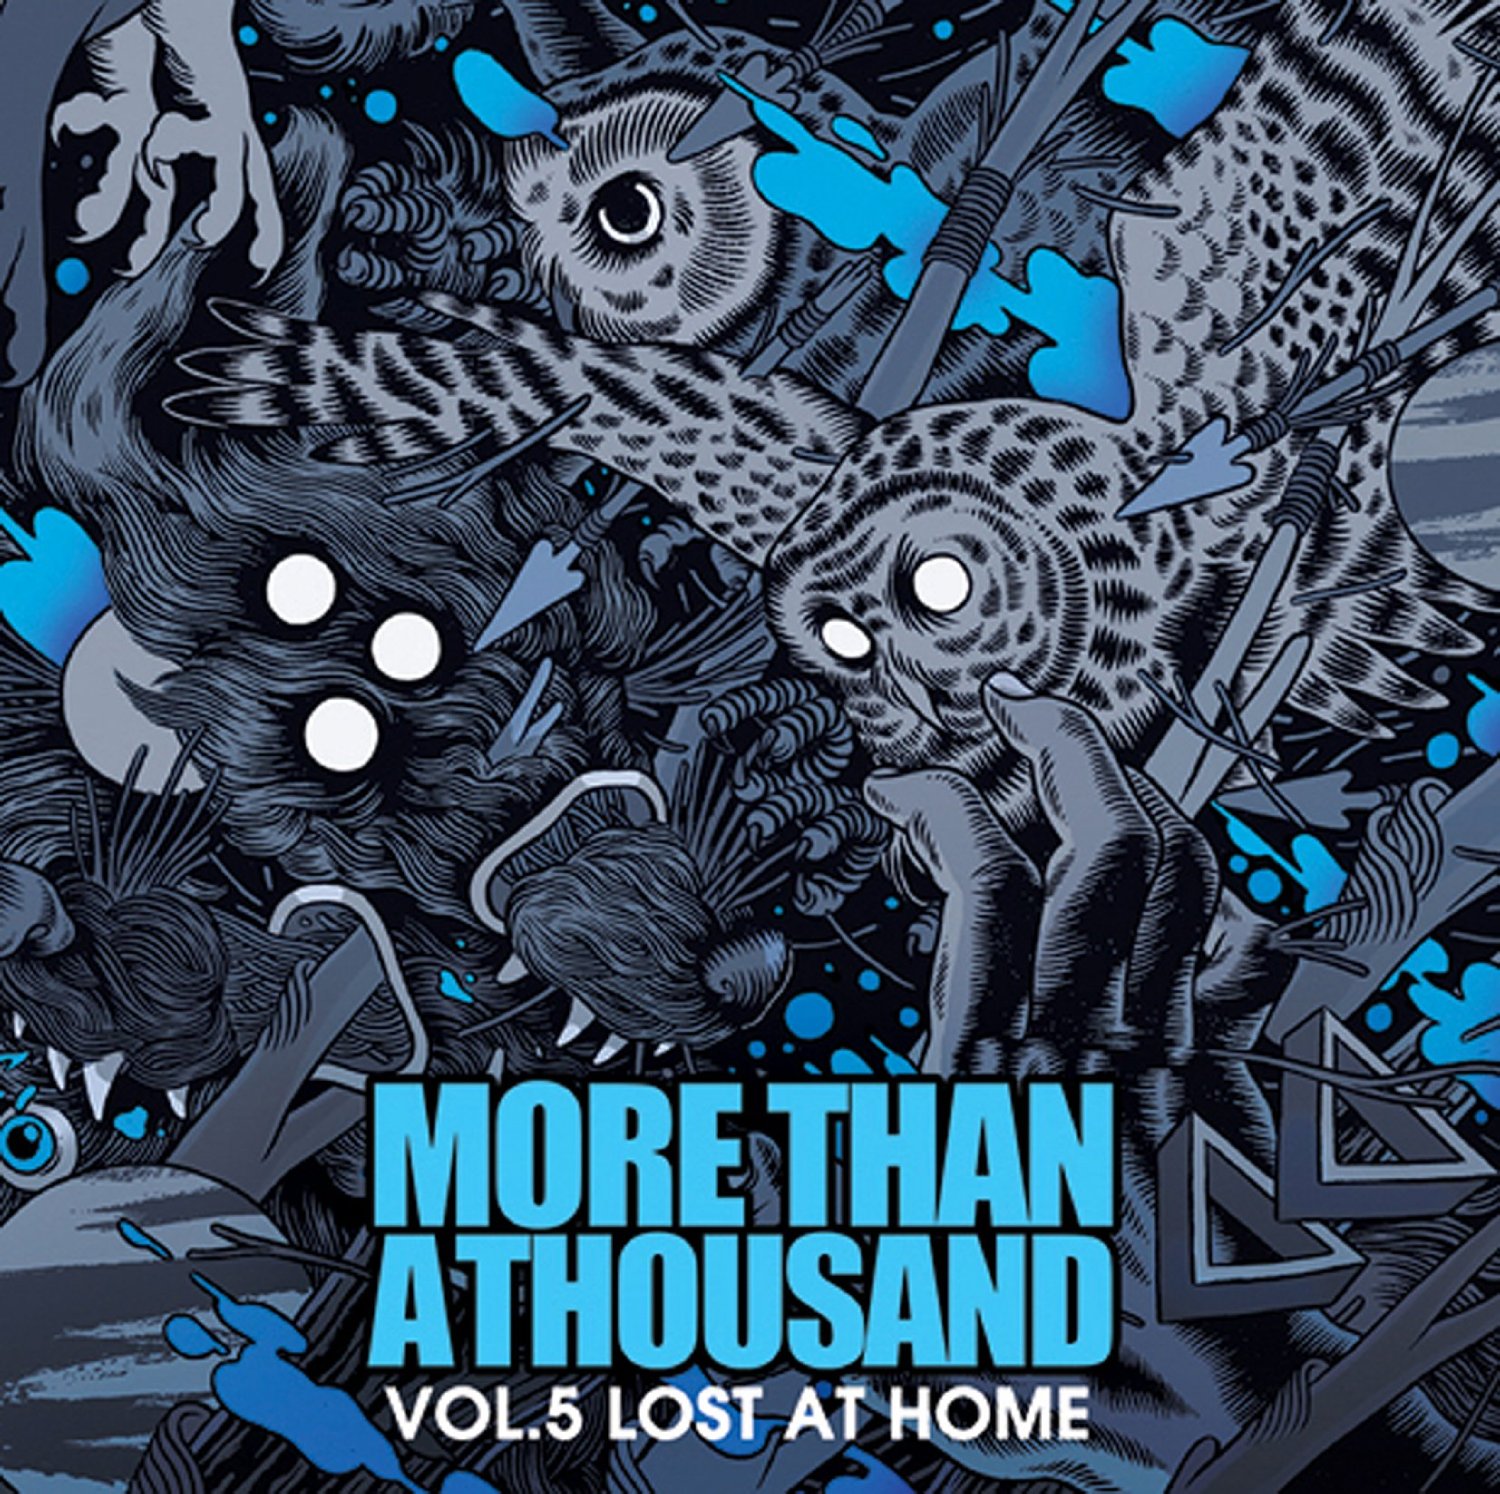 News Added Apr 22, 2013 More Than A Thousand is a metalcore band from Portugal that formation in 2001. Vol. V: Lost at Home will be their third studio album to date following 2010's Vol. IV: Make Friends and Enemies. Submitted By Mike Track list: Added Apr 22, 2013 1. Heist 2. Lost At Home […]